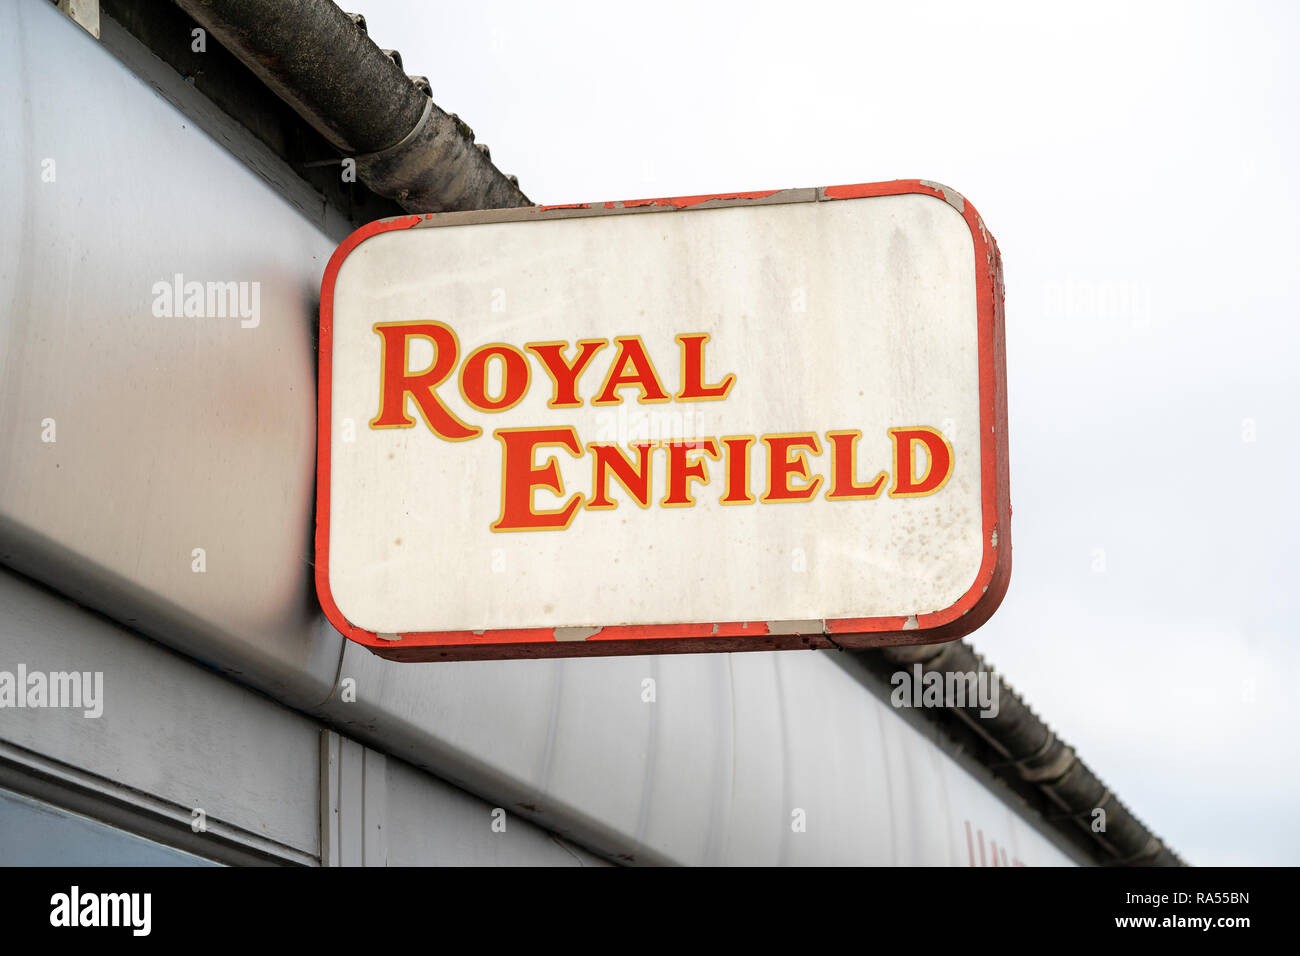 Royal Enfield motorcycle dealer sign Stock Photo